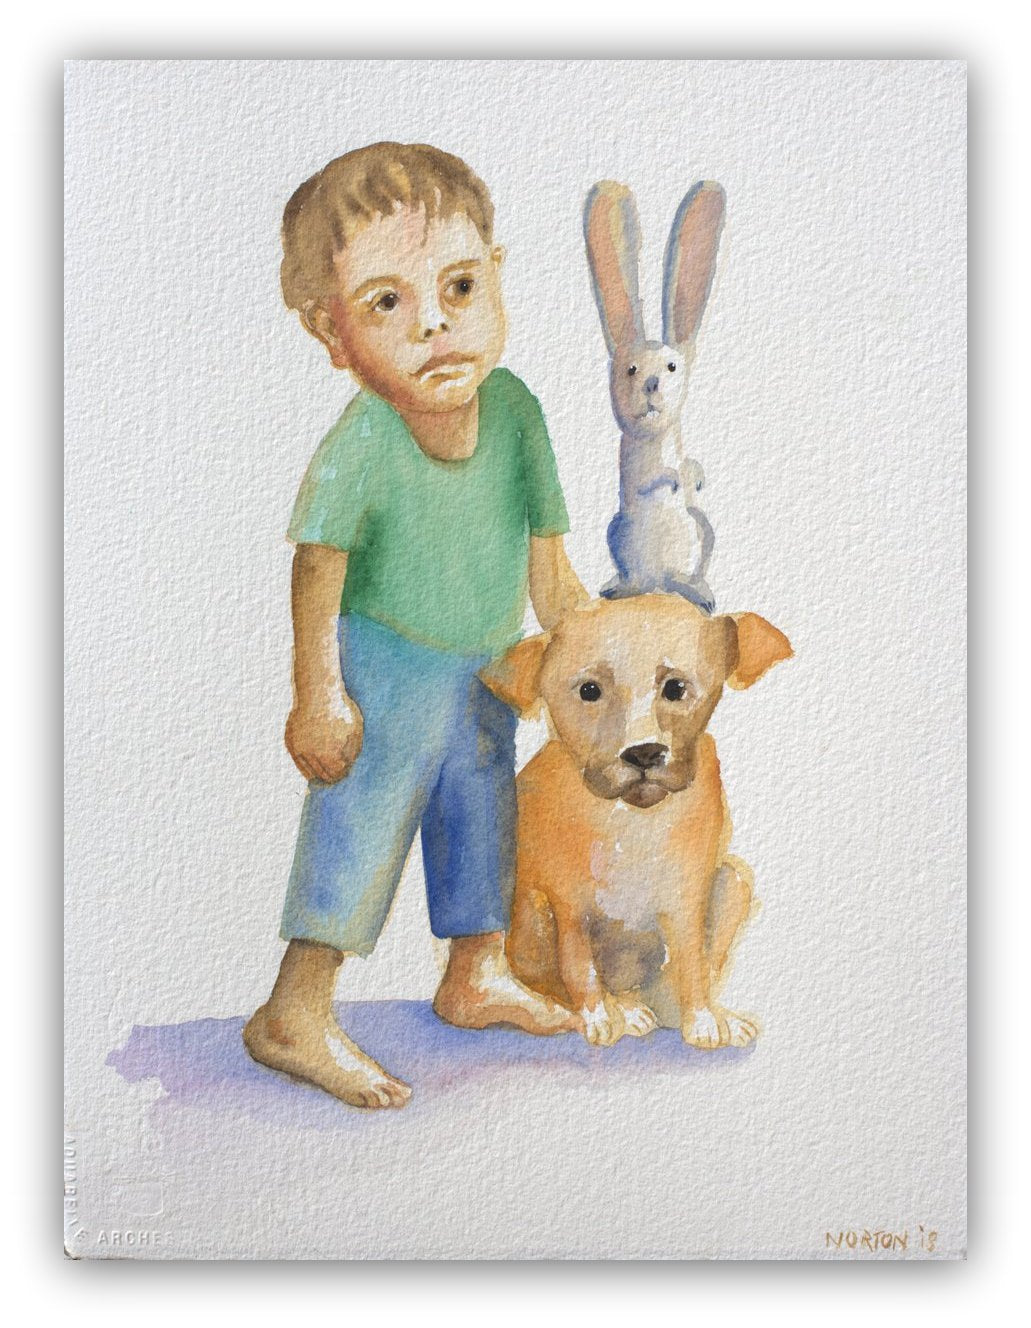 Boy with Puppy and Rabbit